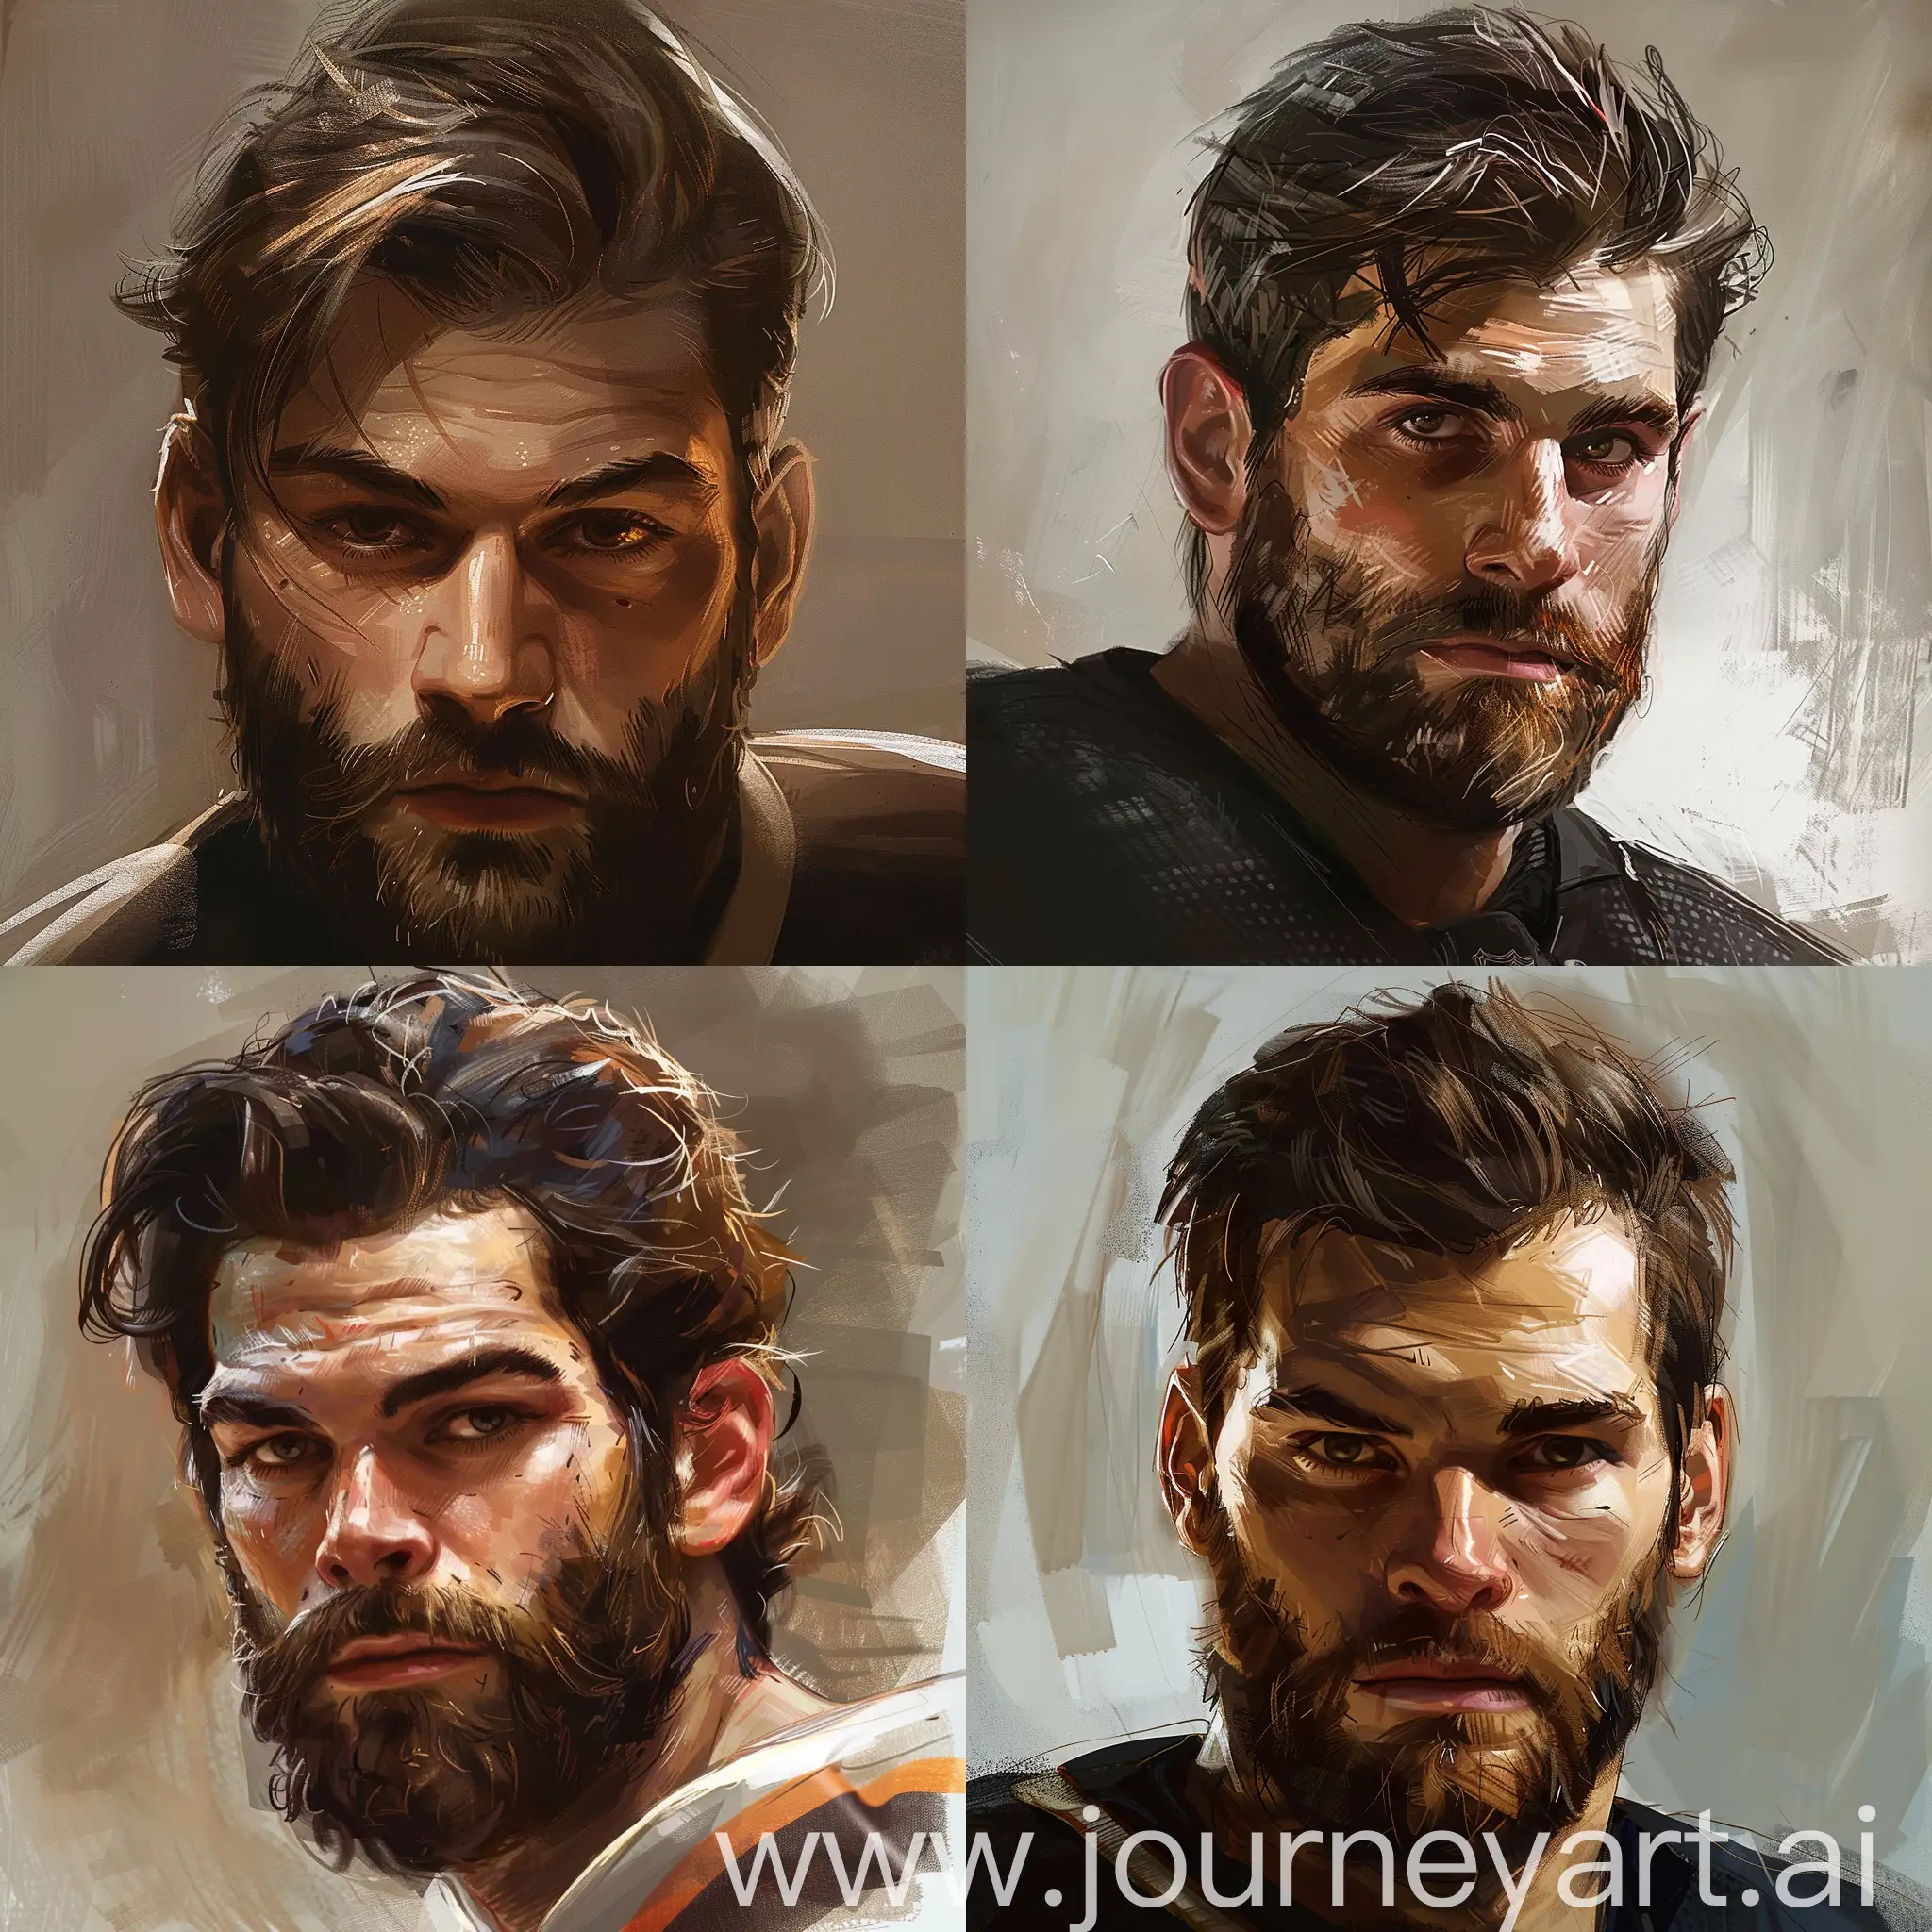 "Compose a compelling portrait capturing the essence of a dedicated hockey player. Accentuate the rich, dark brown tones of his hair and eyes, allowing the subtle nuances to shine. Pay meticulous attention to the details of his beard, sculpting a visual narrative that reflects both the rugged determination and finesse inherent in the sport. Highlight the player's intensity, emphasizing the connection between his unwavering gaze and the passion he brings to the game. Aim for a composition that not only showcases his physical prowess but also unveils the unique personality and character that define him as a hockey athlete." cartoonish kind of style